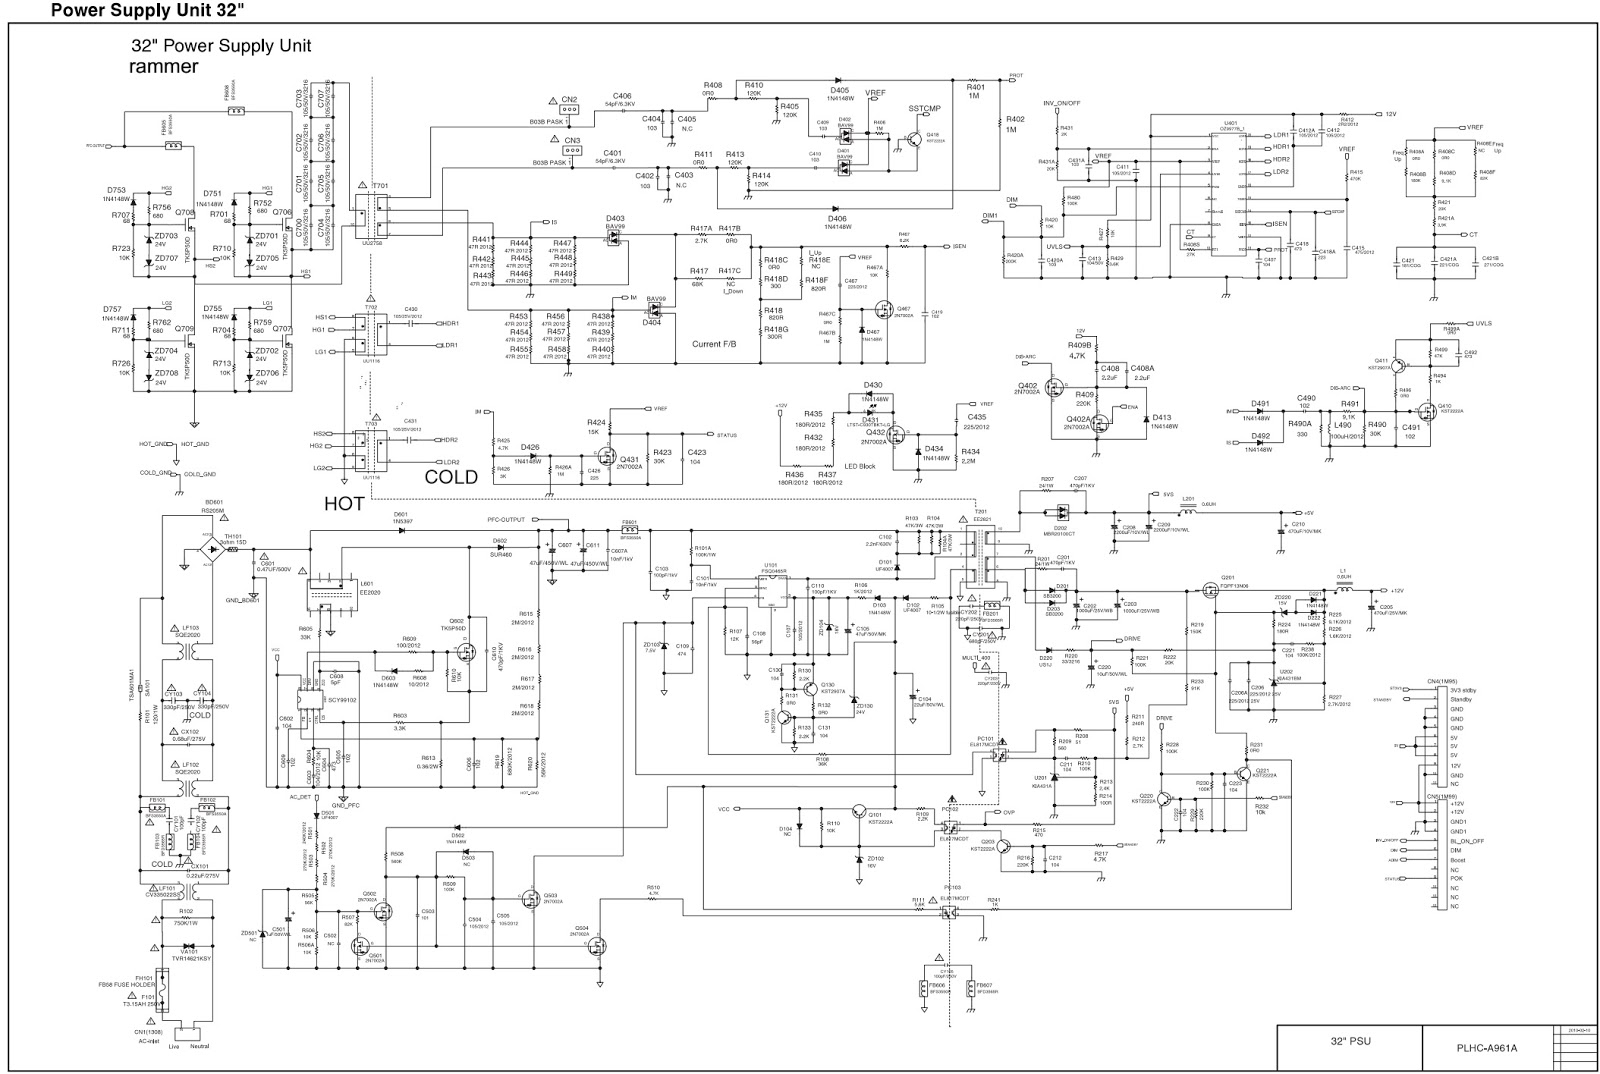 Electro help: Philips 32 inch LCD TV power supply Circuit Diagram